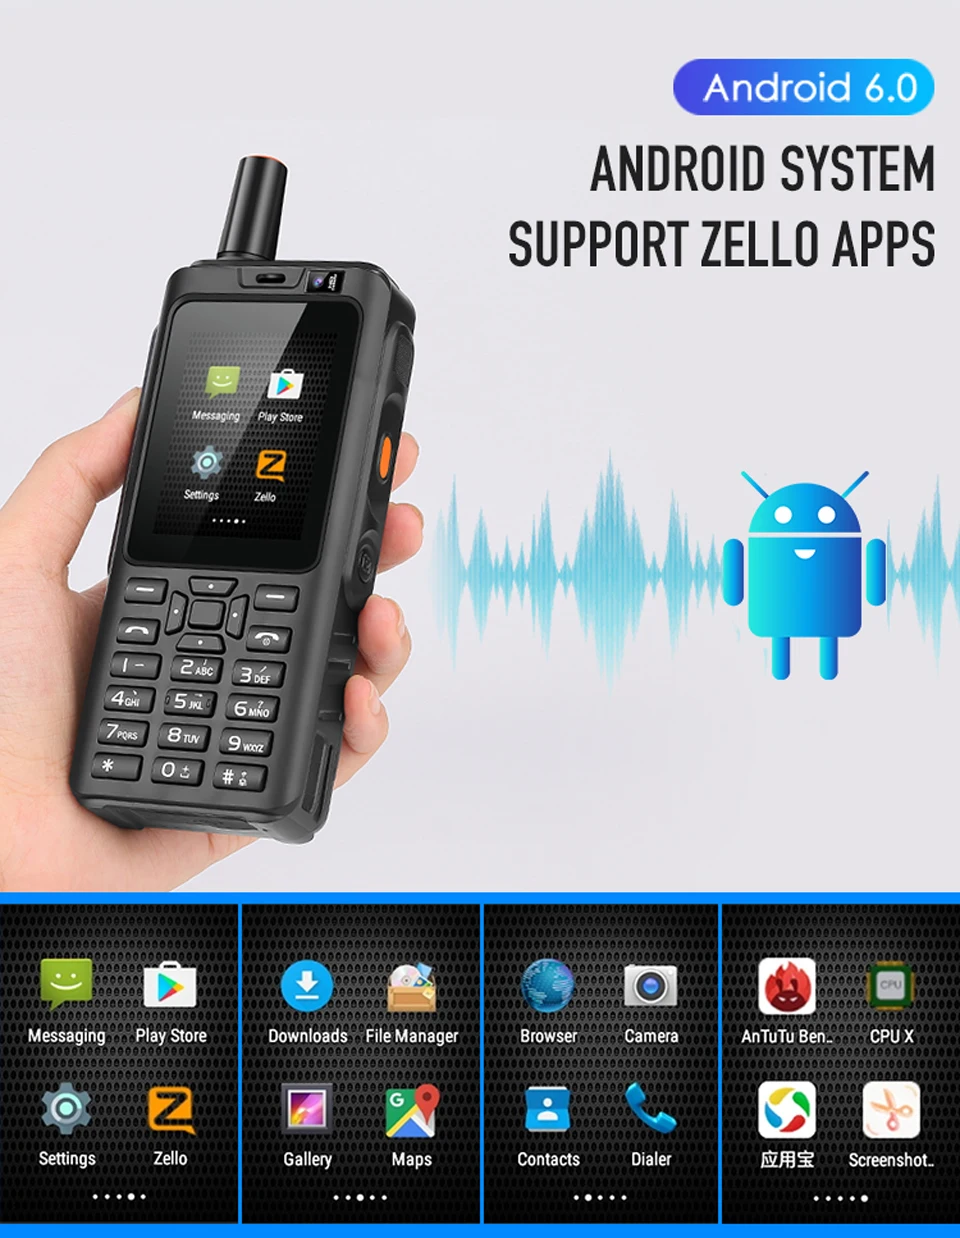 cheapest cell phone for gaming UNIWA F40 Alps F40 Walkie Talkie 4G LTE Mobile Phone IP65 Waterproof Rugged Keyboard Smartphone Quad Core Android 8.1 VS F50 F60 motorola moto cell phone